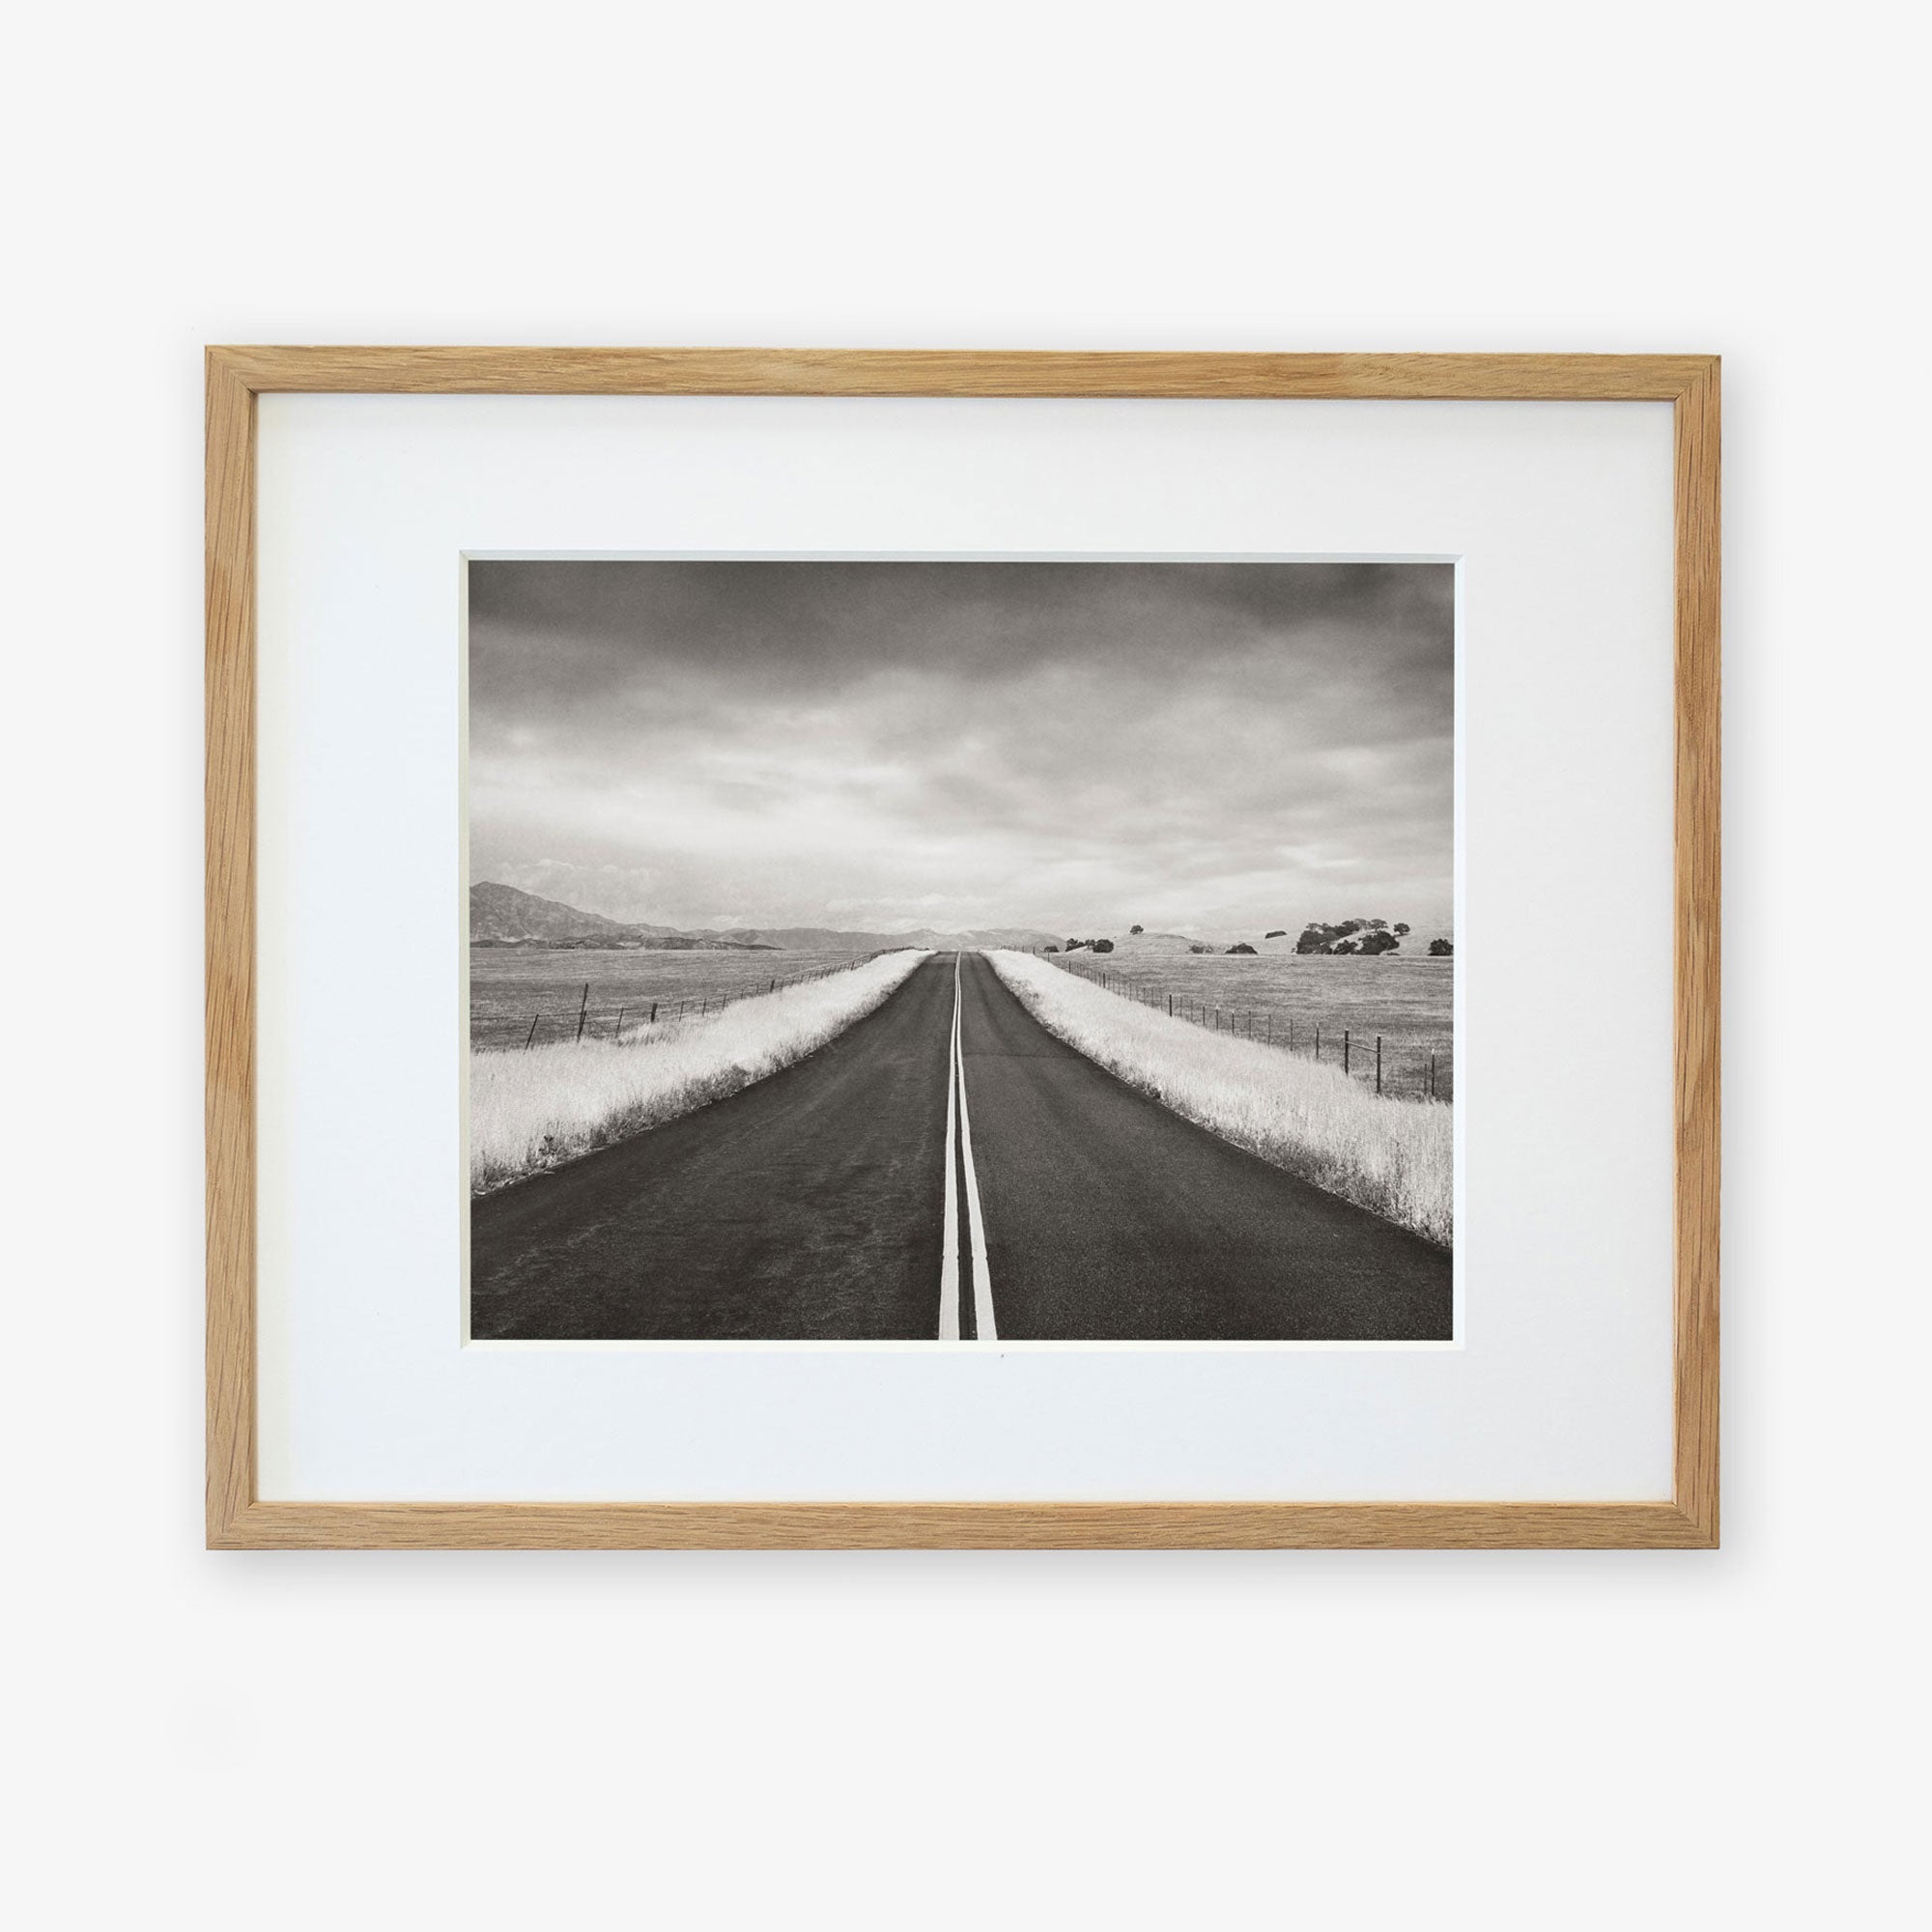 A framed black-and-white photograph depicting a straight road extending through a rural landscape under a cloudy sky, printed on archival photographic paper, displayed on a white background. This is the Offley Green Black and White Rural Landscape Art print entitled 'American Road Trip'.